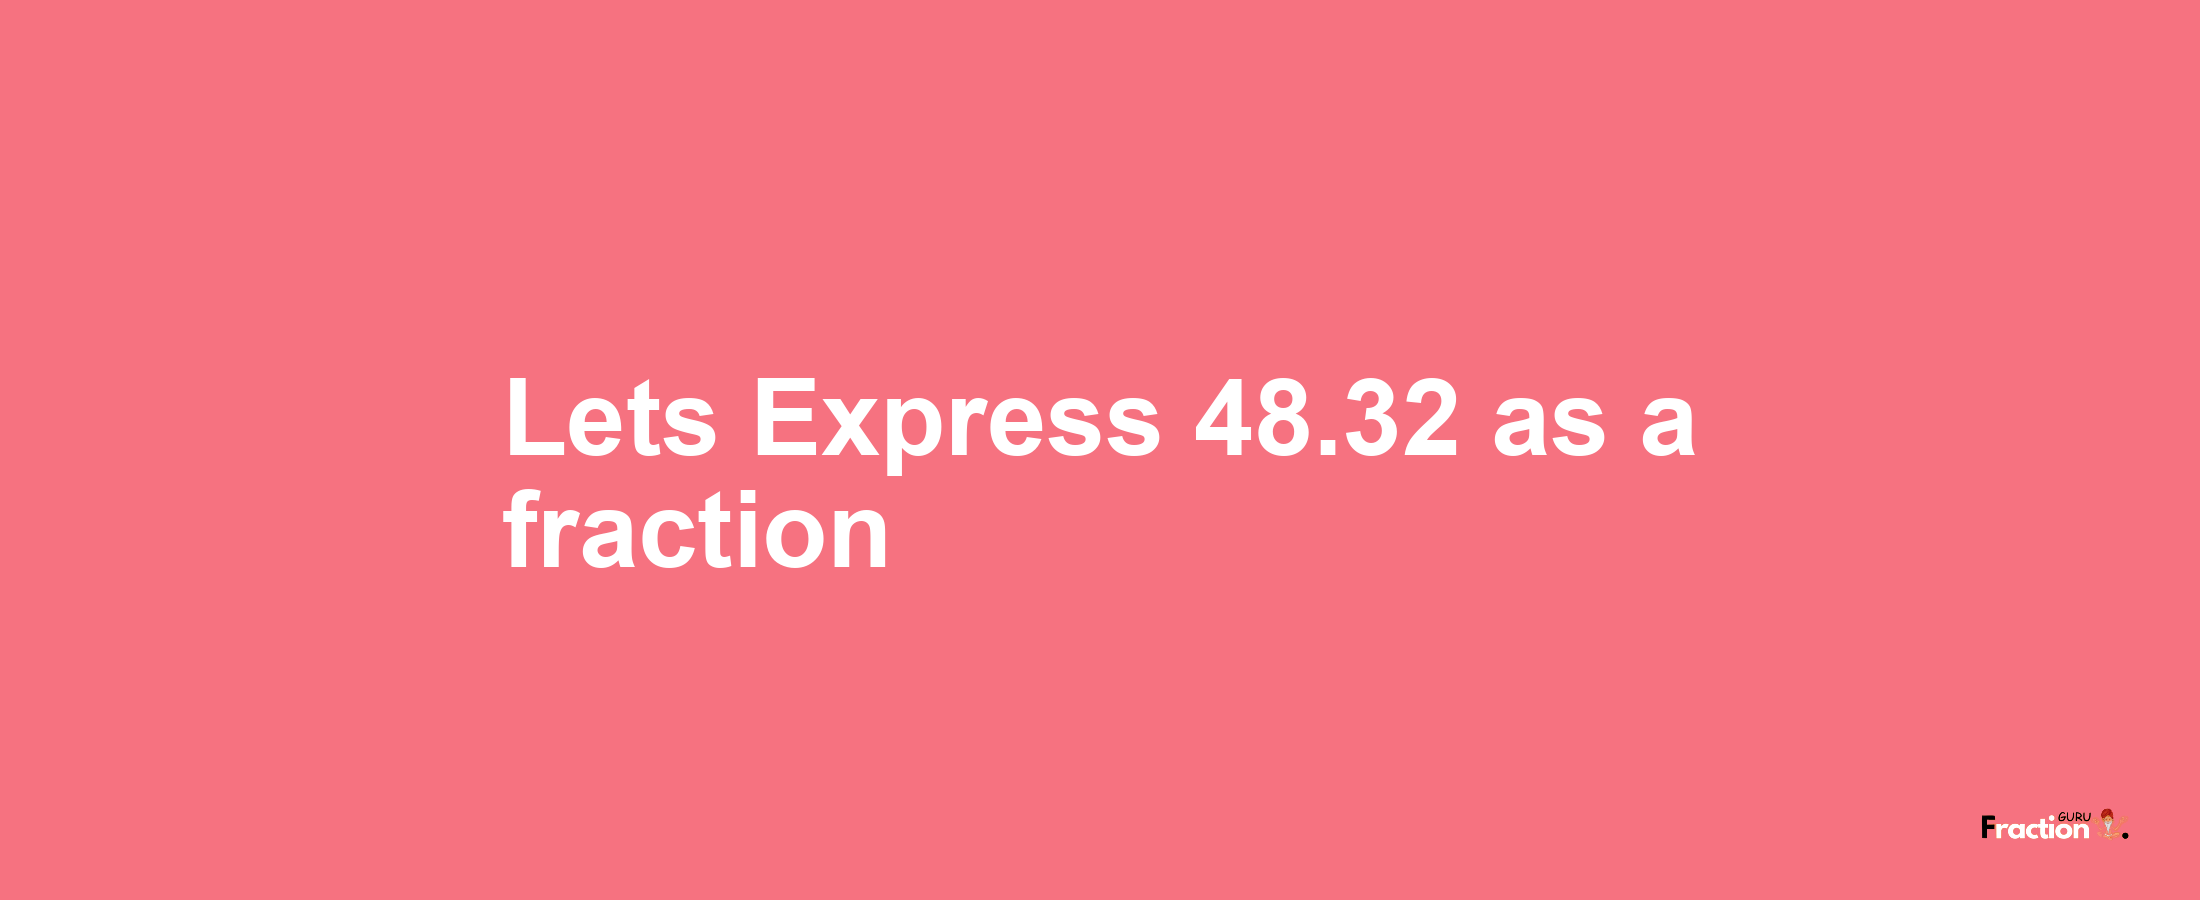 Lets Express 48.32 as afraction